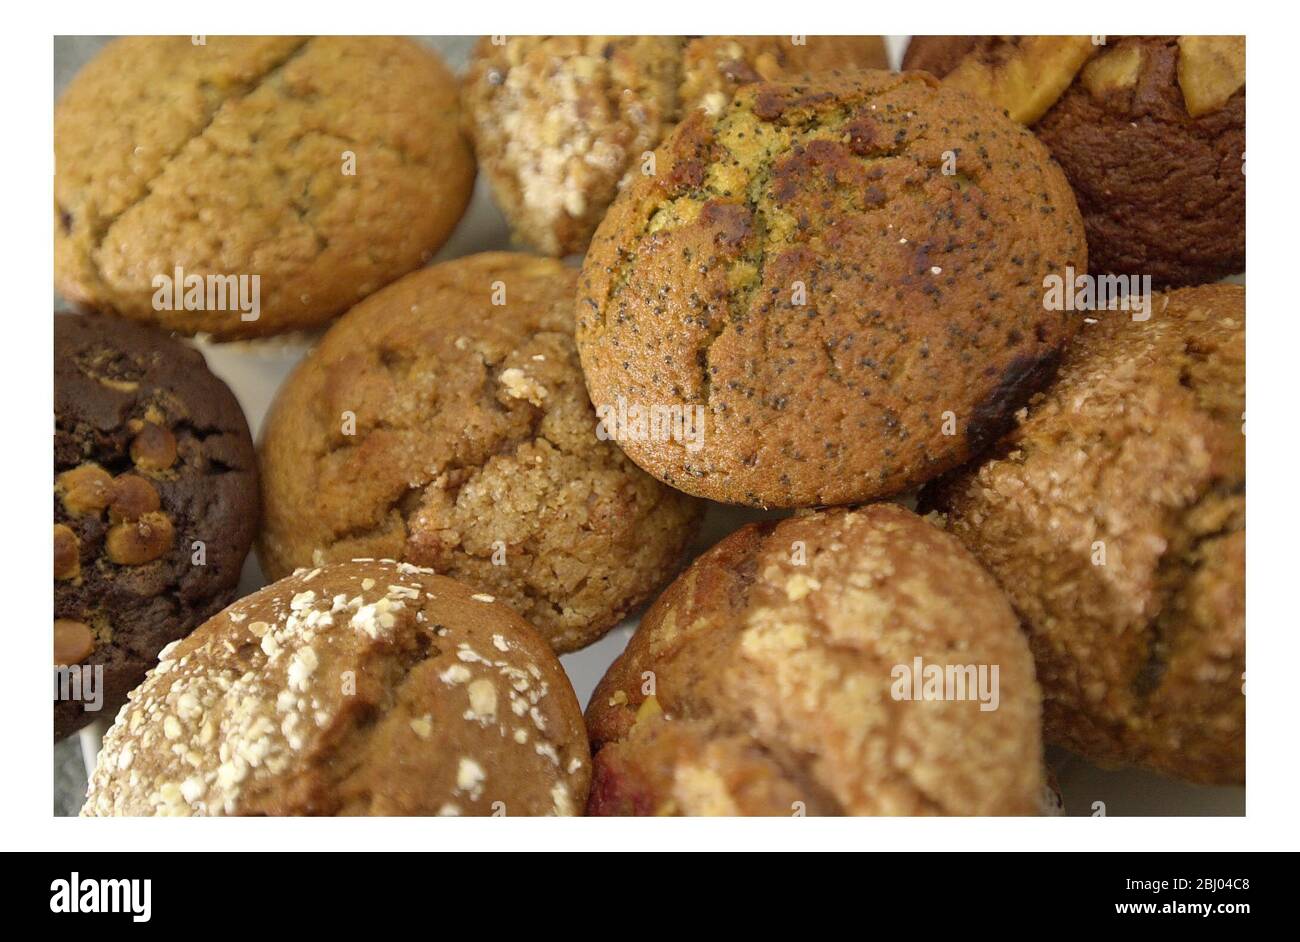 MUFFINS - - FOR FEATURE ON THE RISE OF THE MIGHTY MUFFIN. Stock Photo